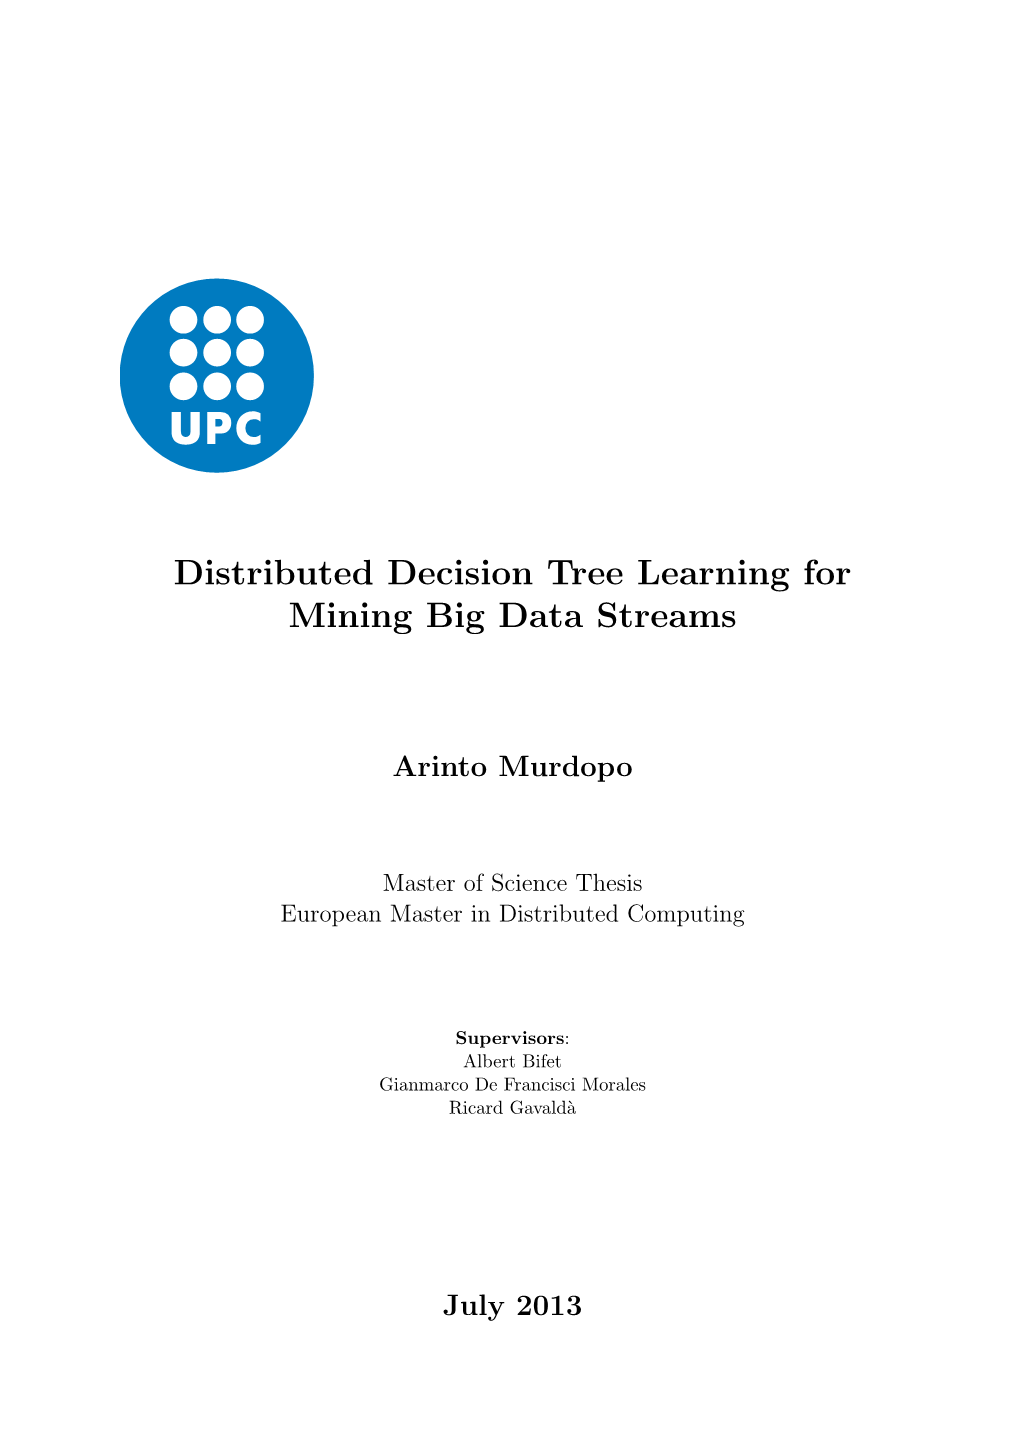 Distributed Decision Tree Learning for Mining Big Data Streams